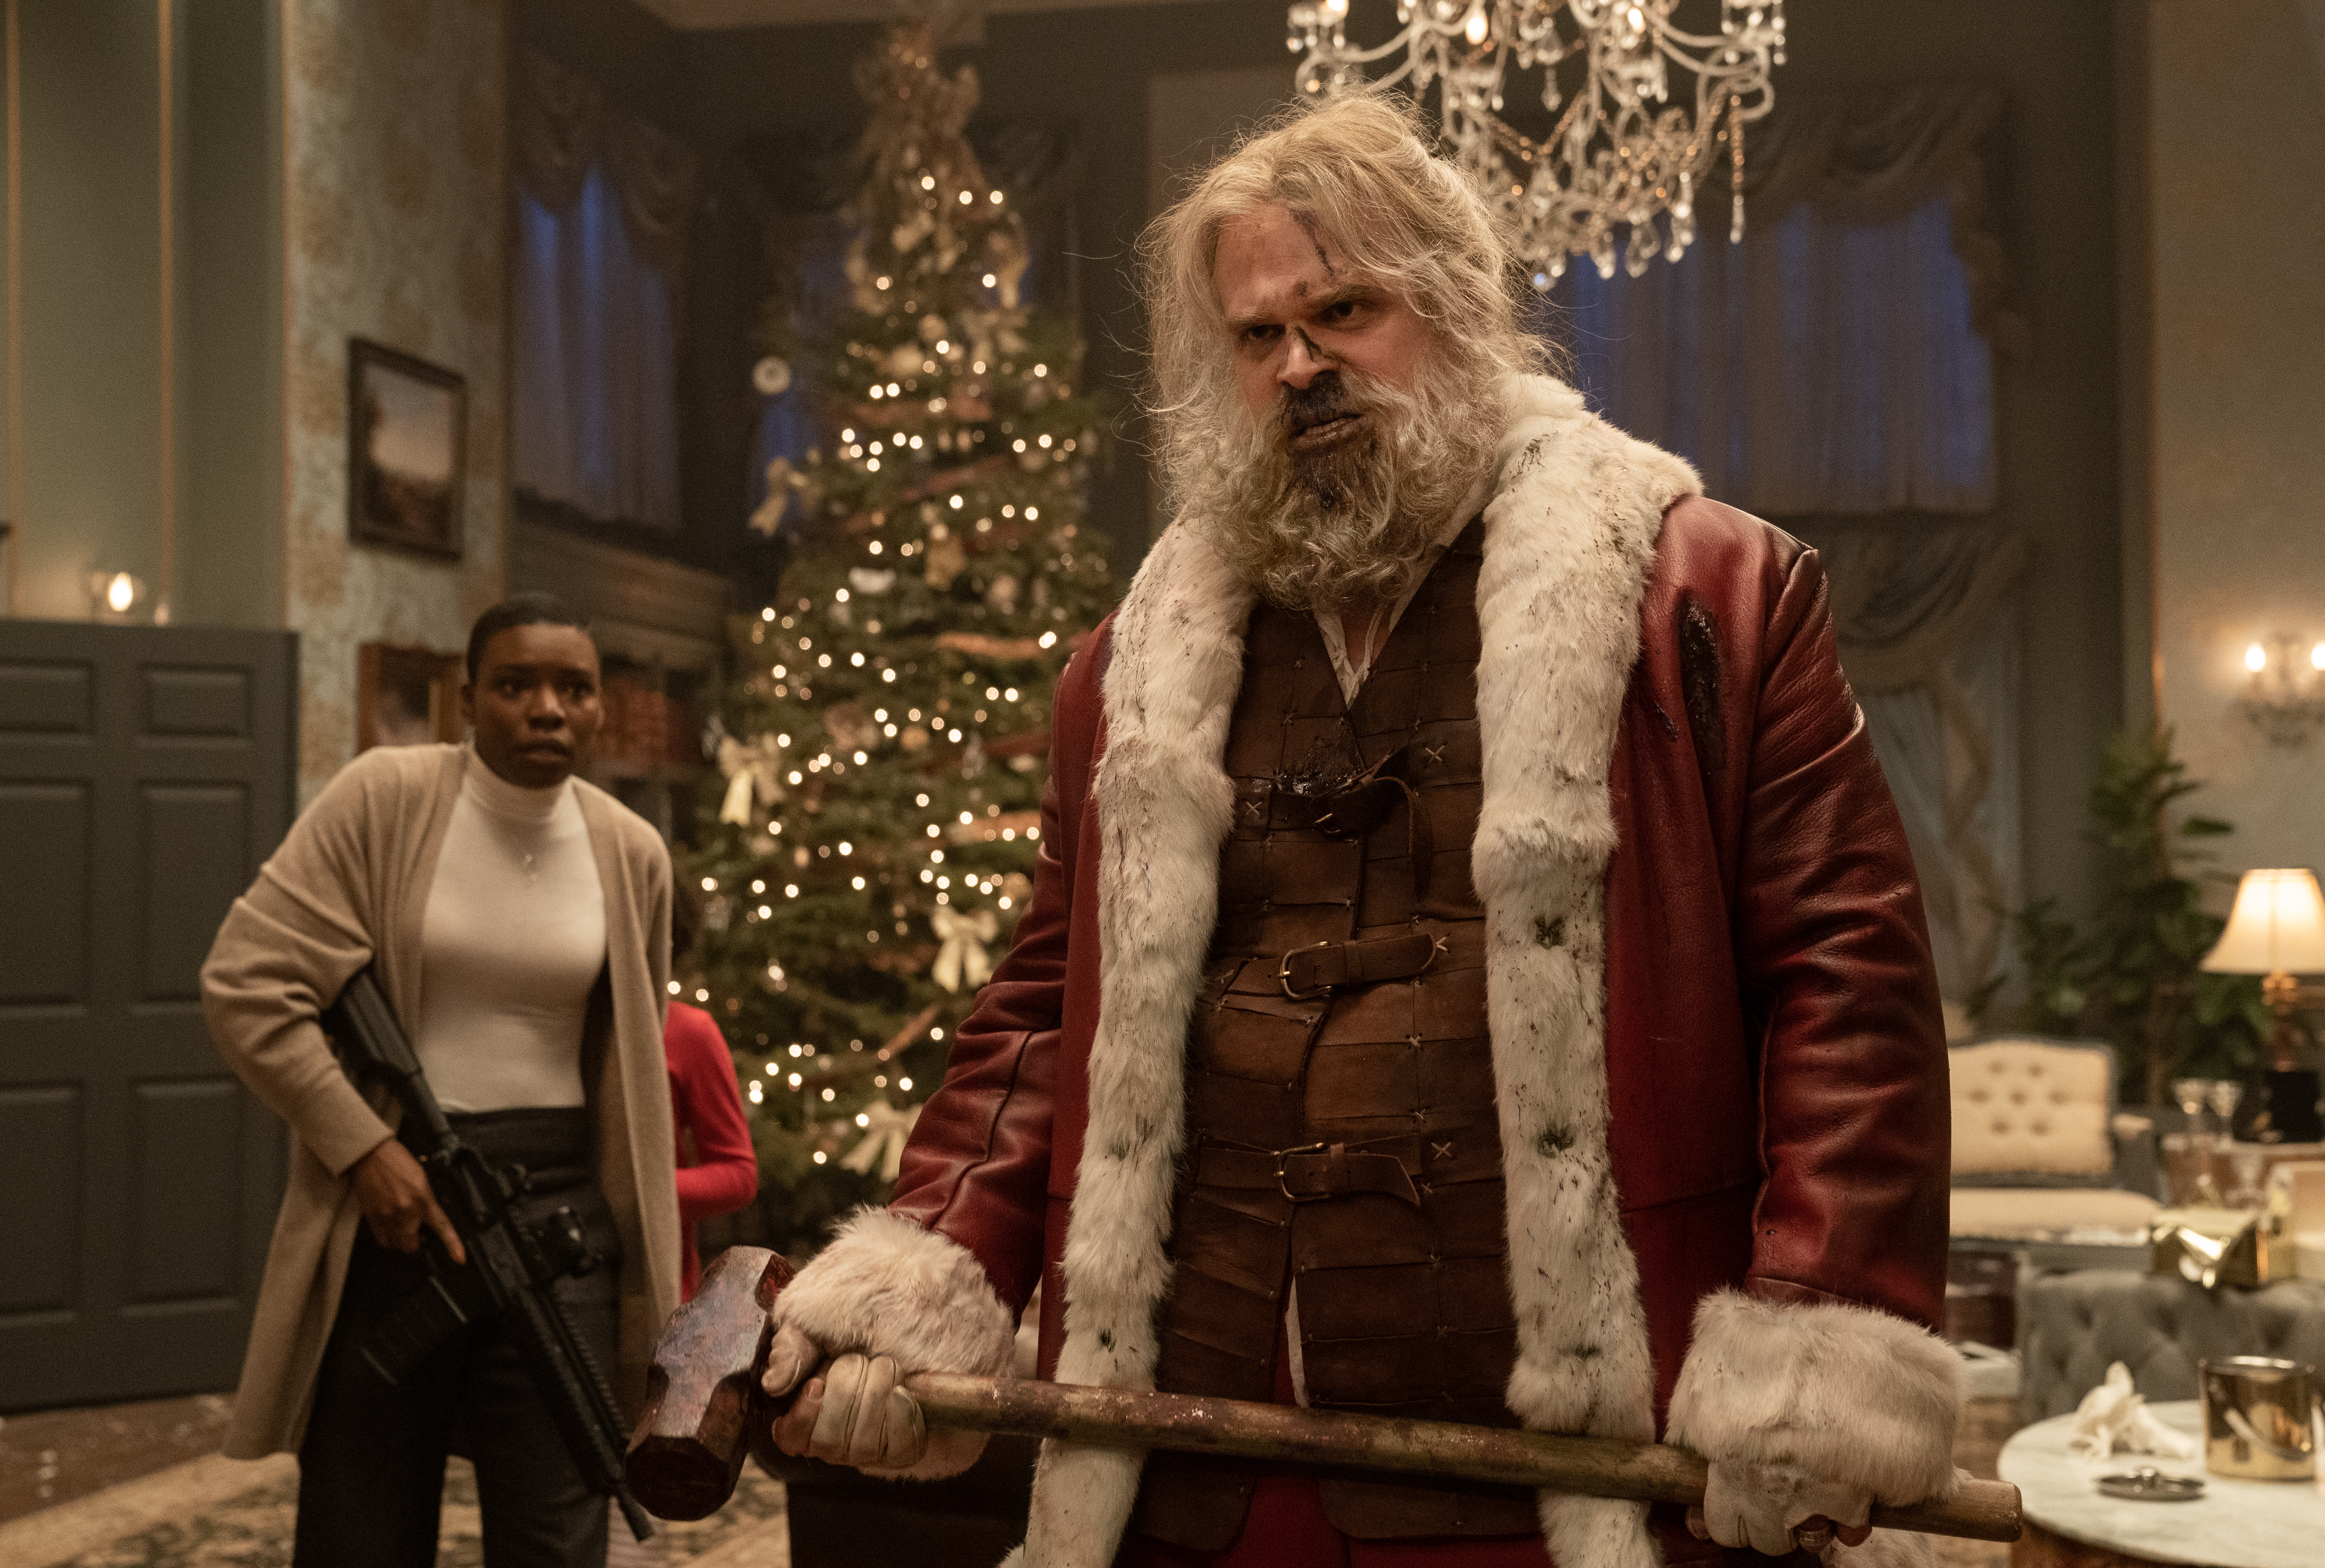 Santa Claus (David Harbour), with a bashed-in, bloody nose, glowers at something off screen in Violent Night